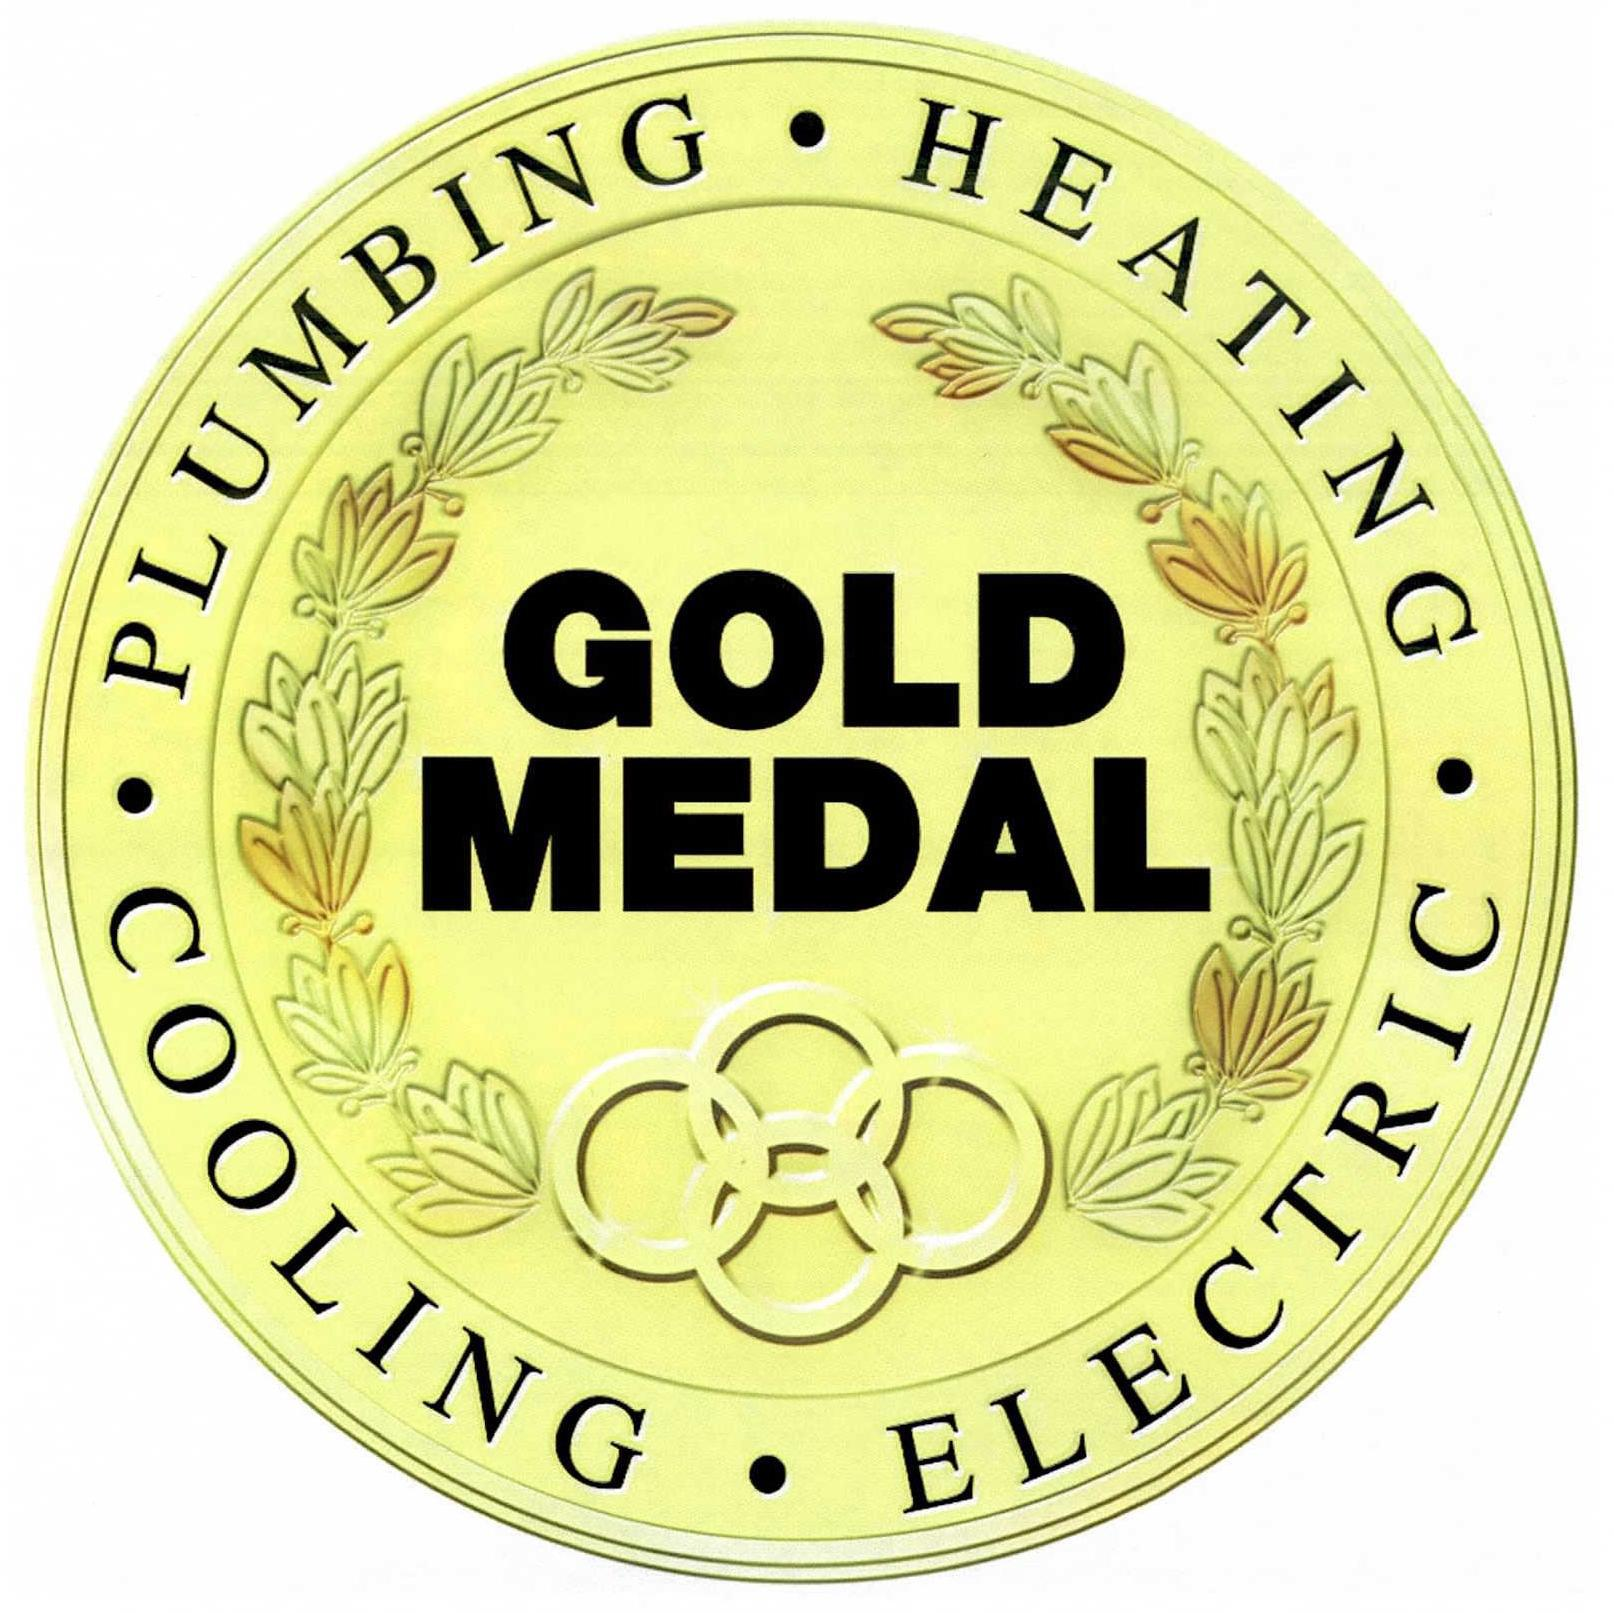  GOLD MEDAL PLUMBING HEATING COOLING ELECTRIC